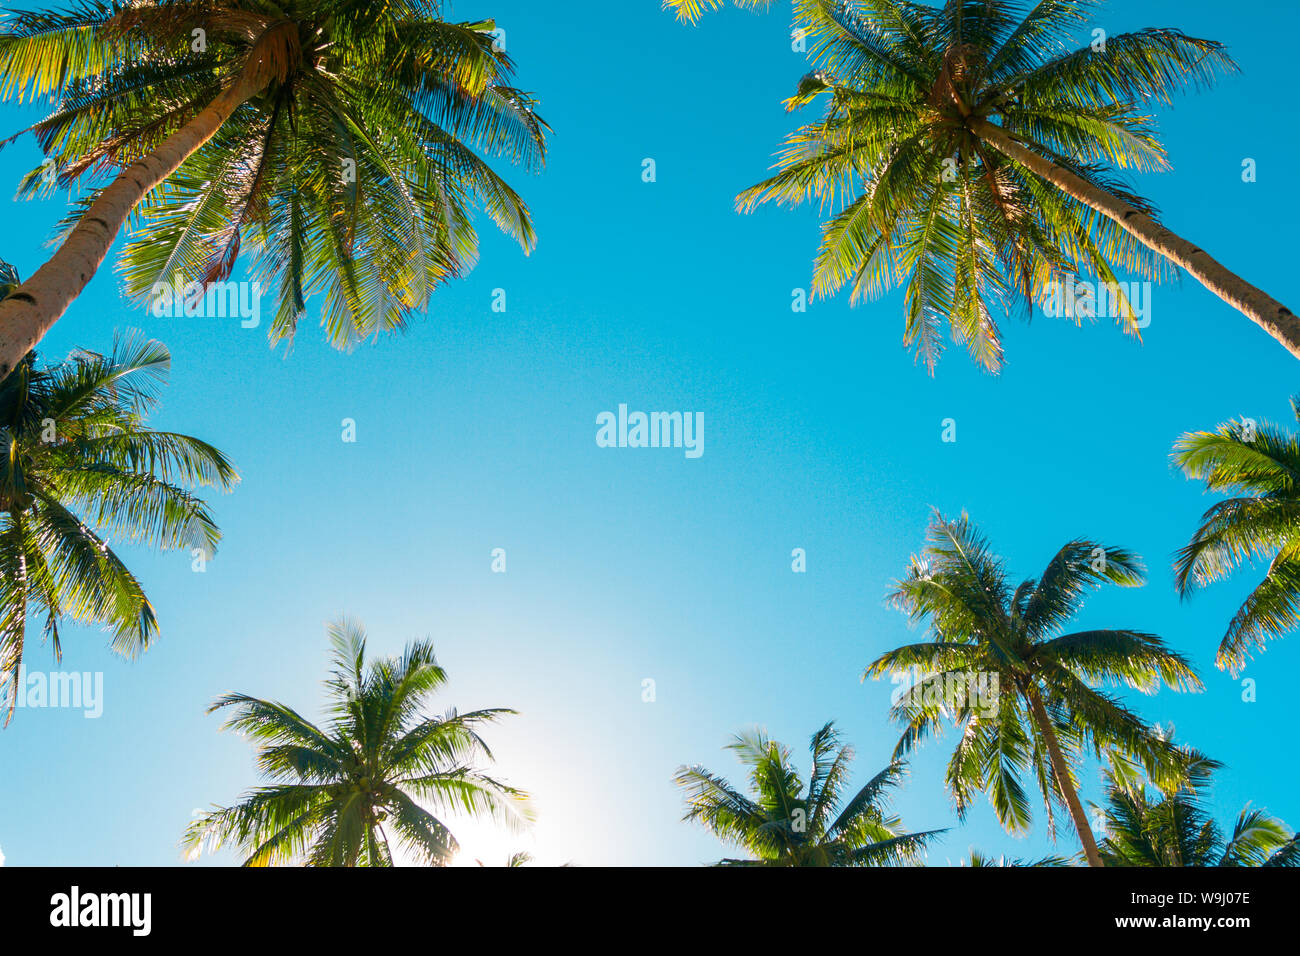 A forest of palm trees on a sunny day Stock Photo